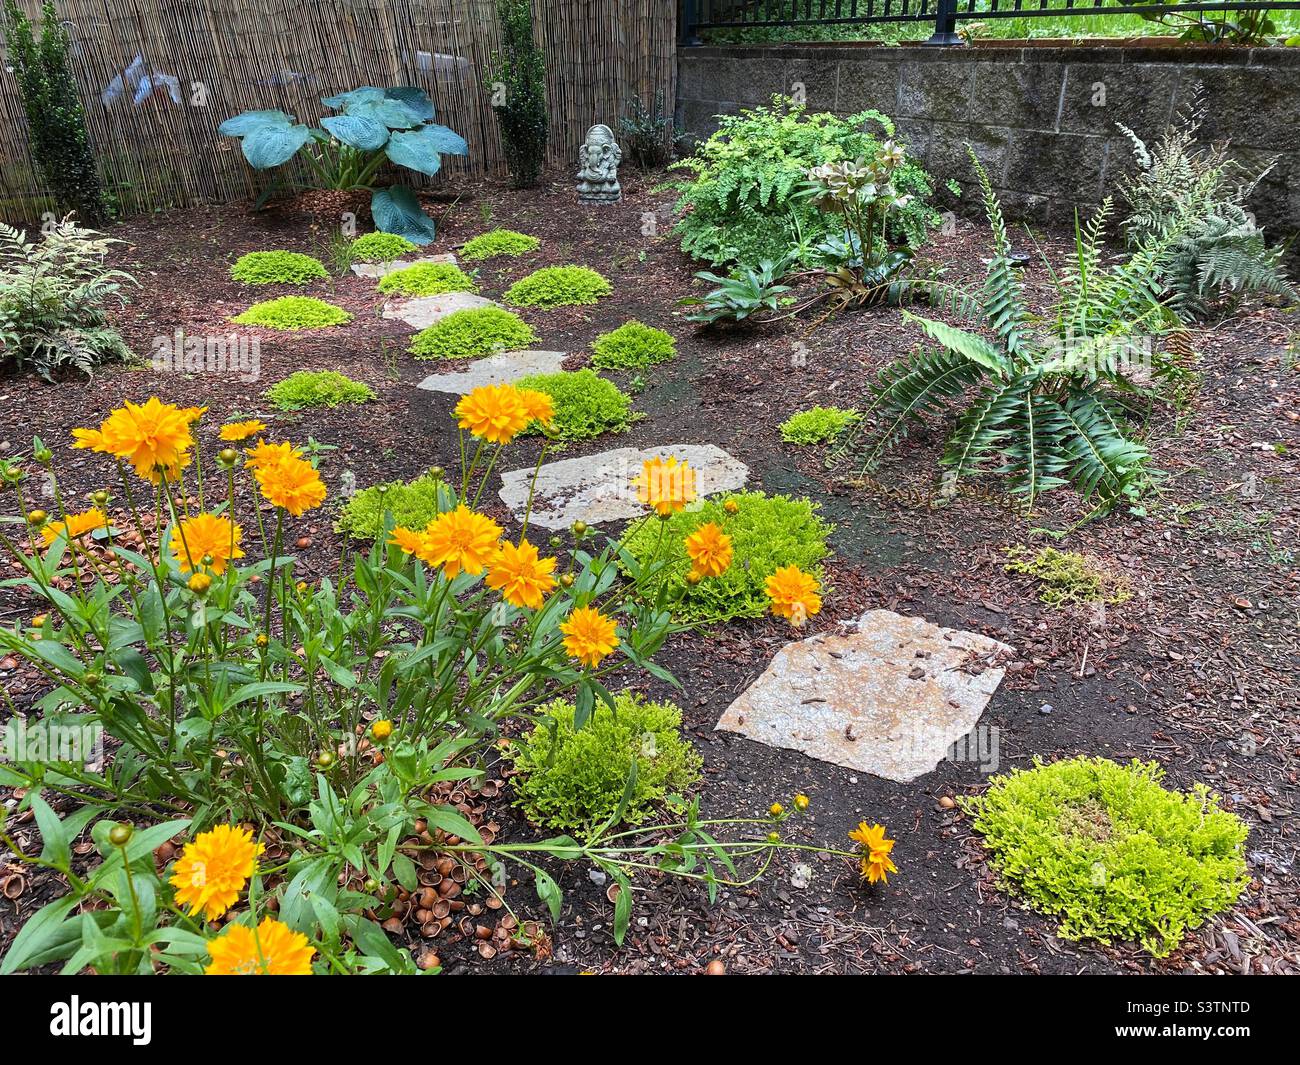 A shade garden with ferns, moss, hostas, stepping stones and flowers. Stock Photo